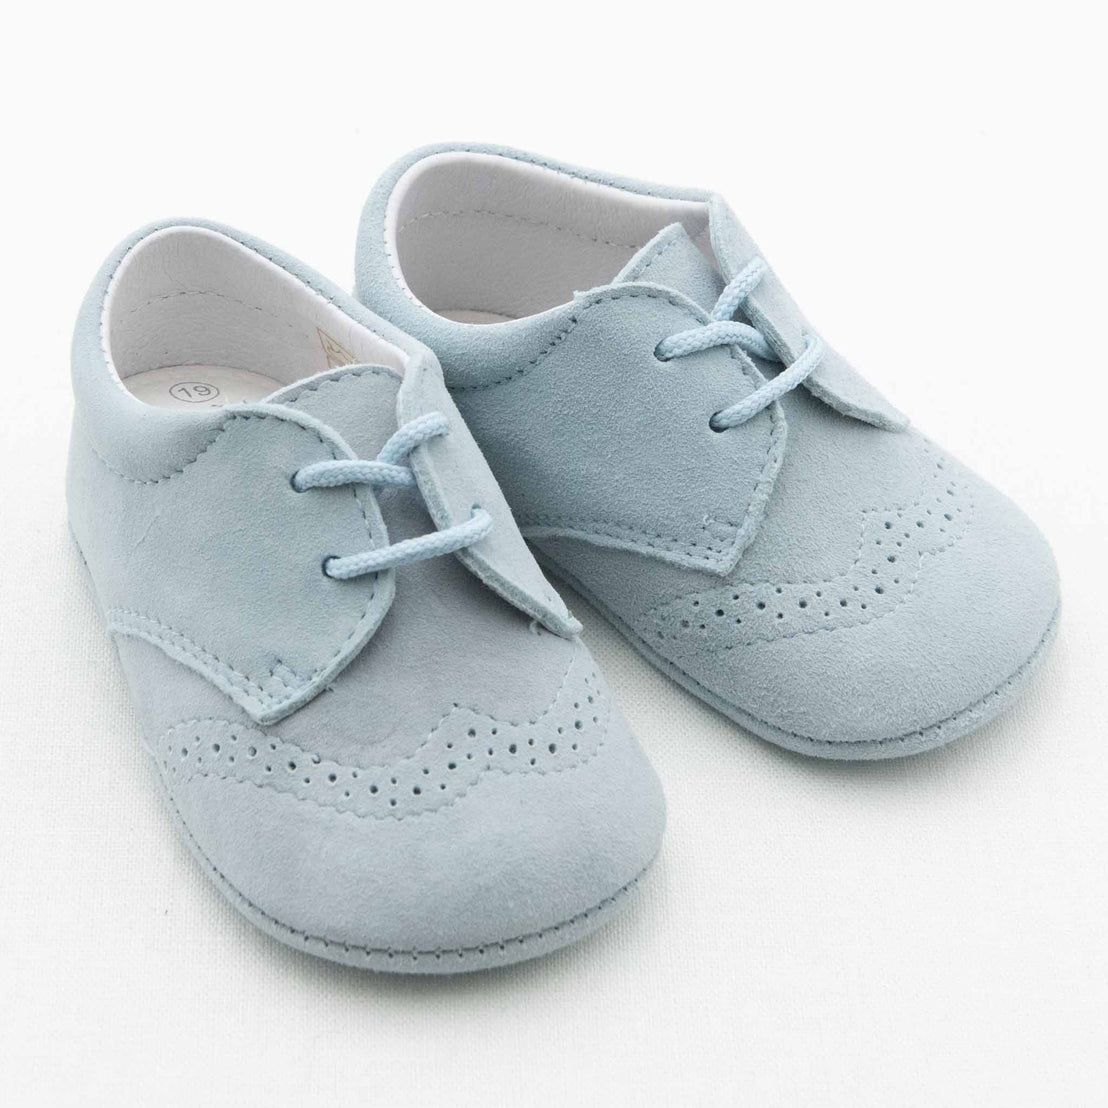 A pair of Ian Suede Shoes in baby blue for boys, featuring detailed stitching and perforated patterns on the front and sides, with laces. These handmade suede shoes for infants are displayed on a plain white background.